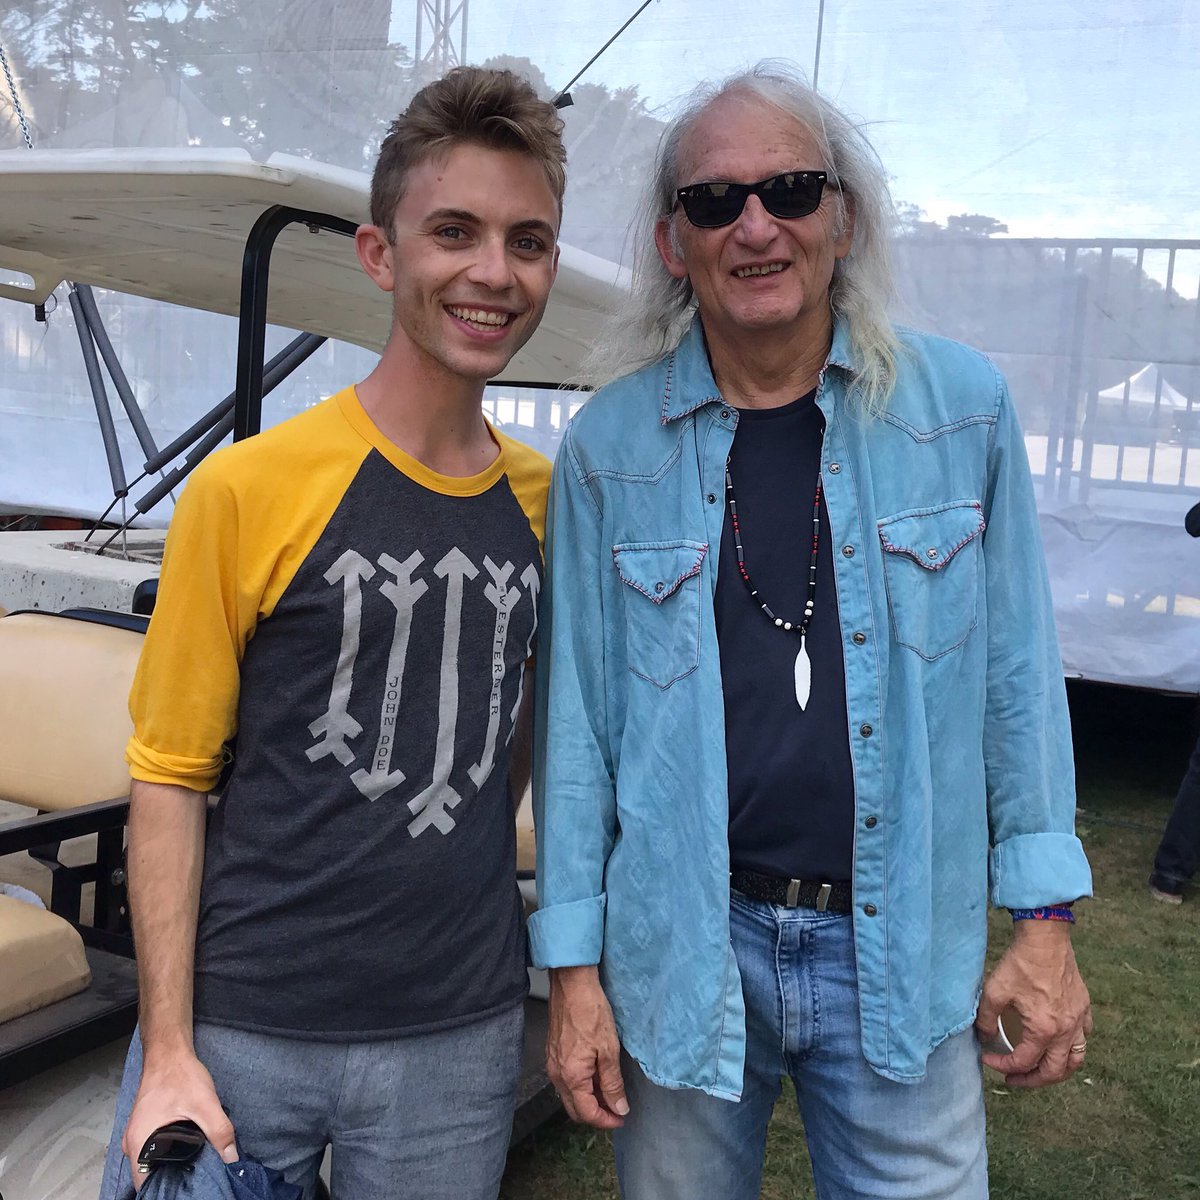 “You’re entering a world of pain” • Hardly Strictly 19 was fun as ever, punctuated by a brief hang with the great Jimmie Dale Gilmore, whose work in both music and film is a fanboy trigger 📸Peyton Harvey #thebiglebowski #jimmiedalegilmore #flatlanders #sanfrancisco #markitzero